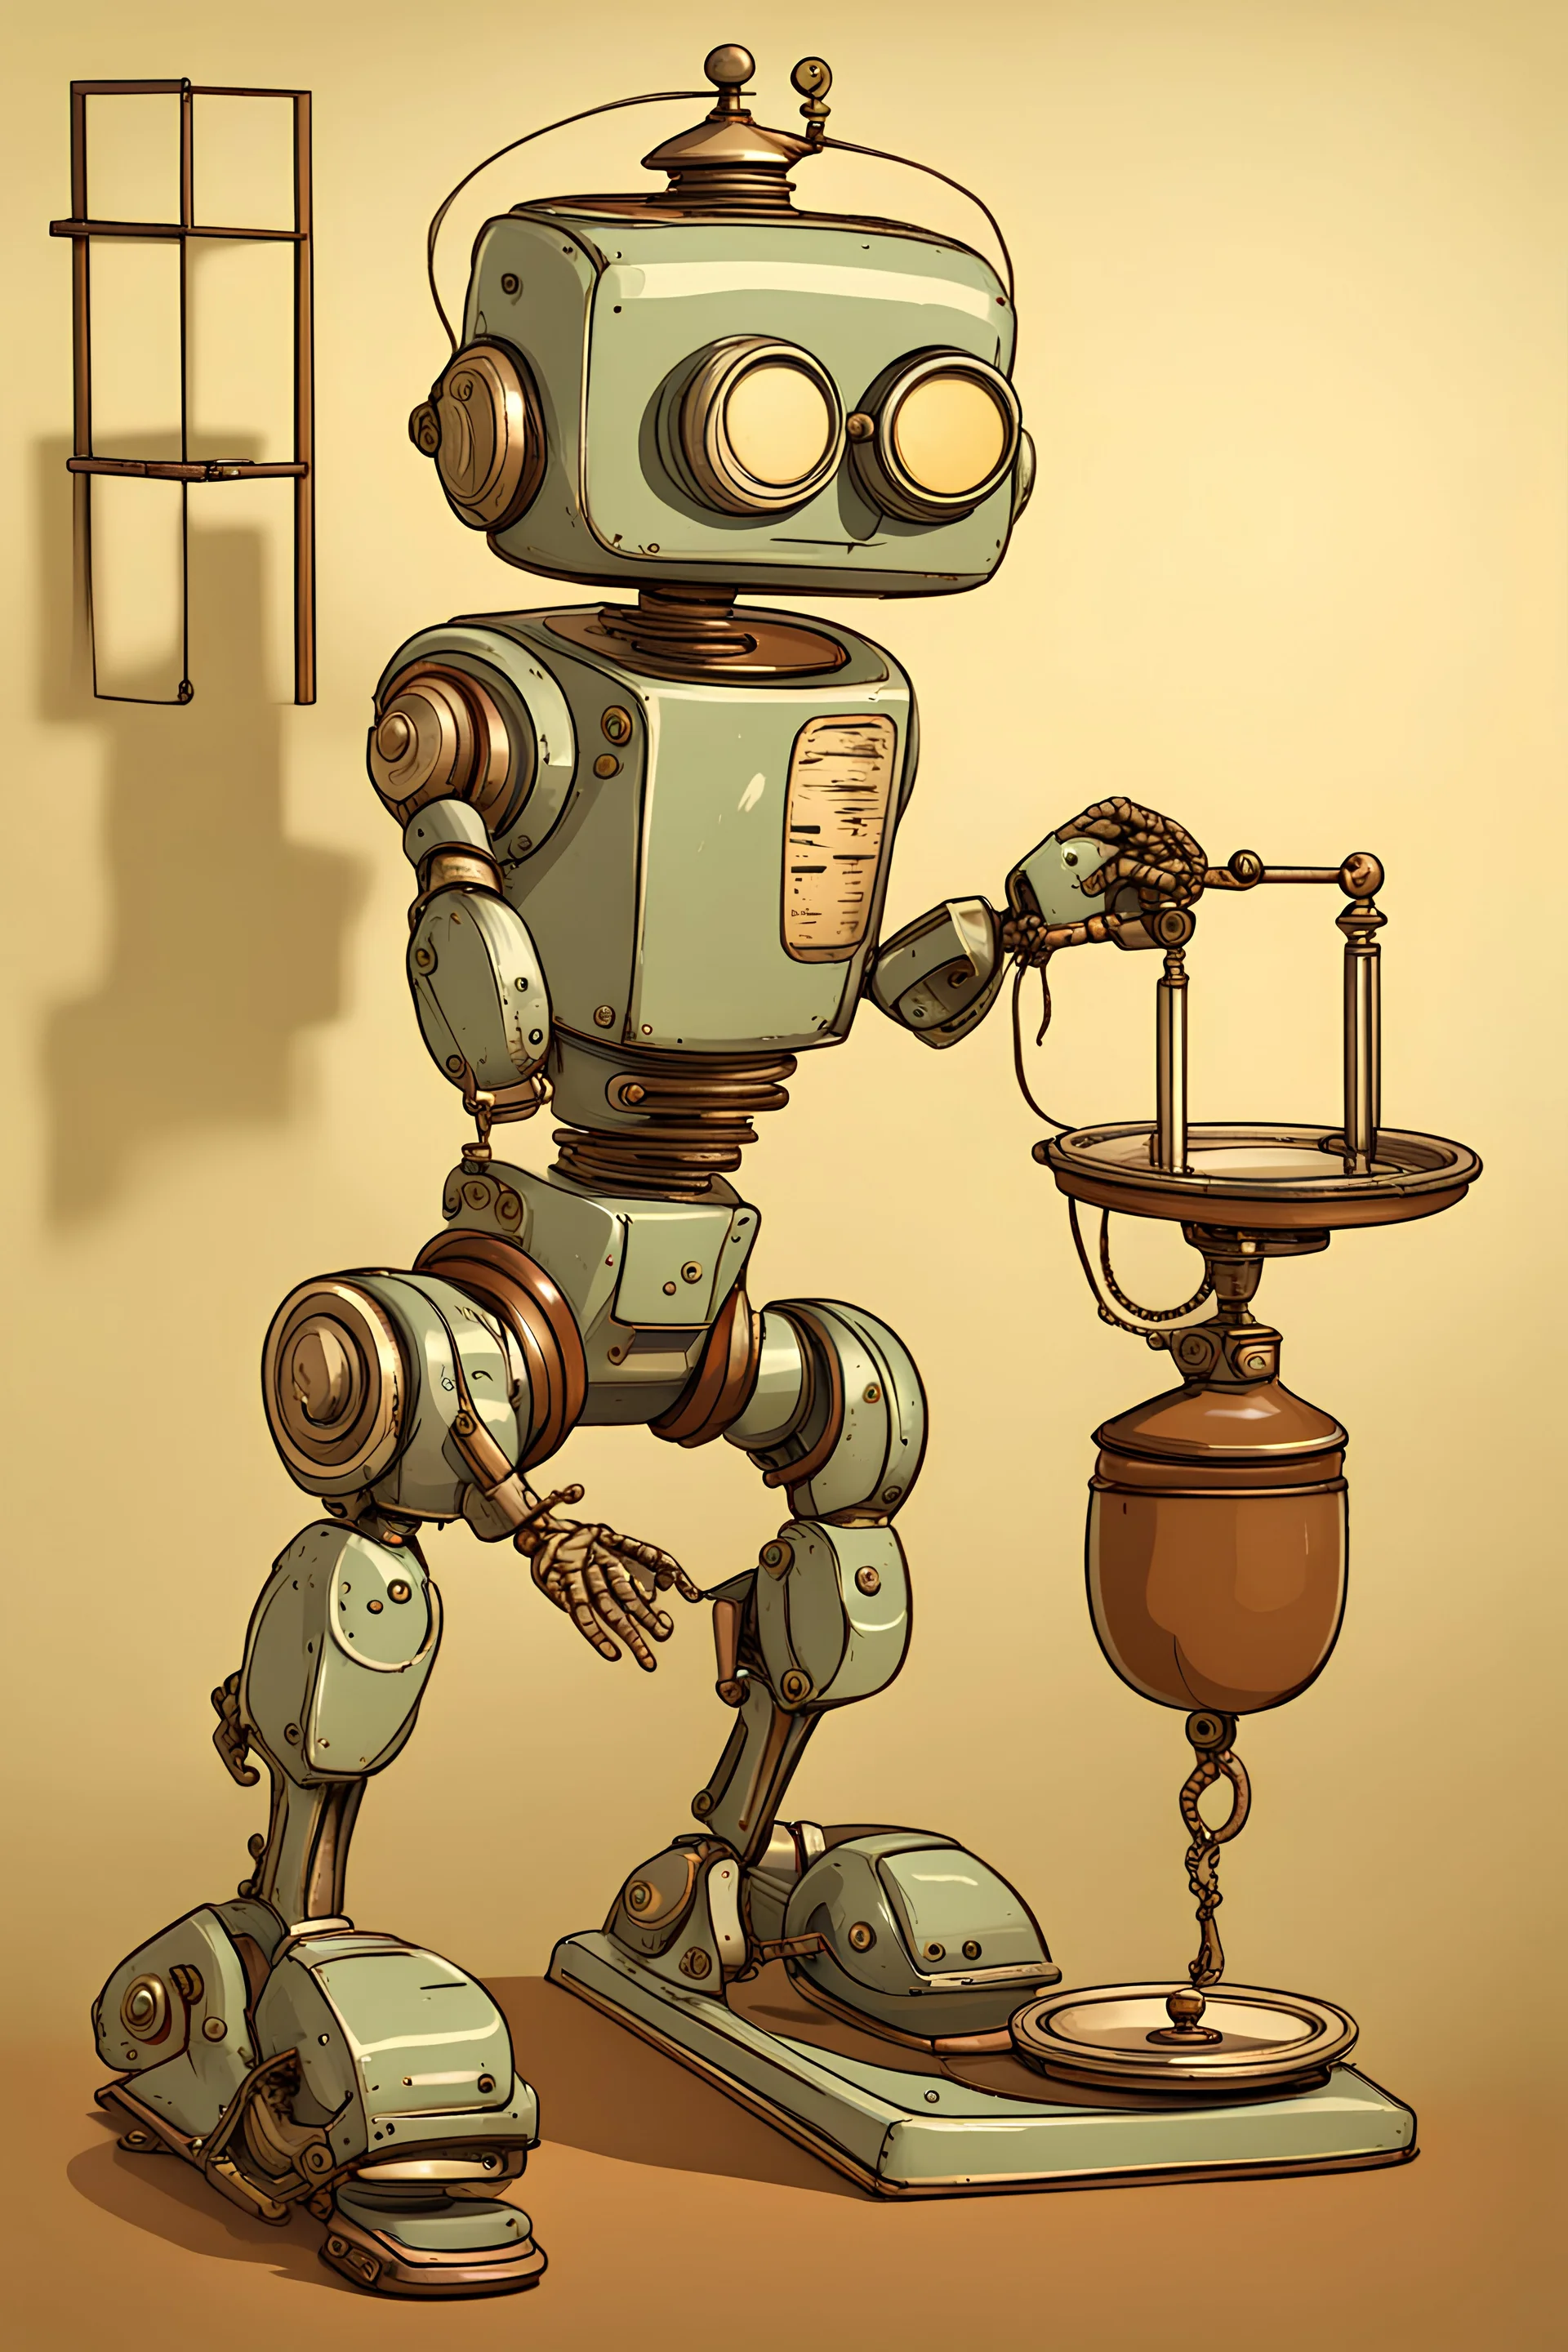 a robot wearing a blindfold and holding an antique scale